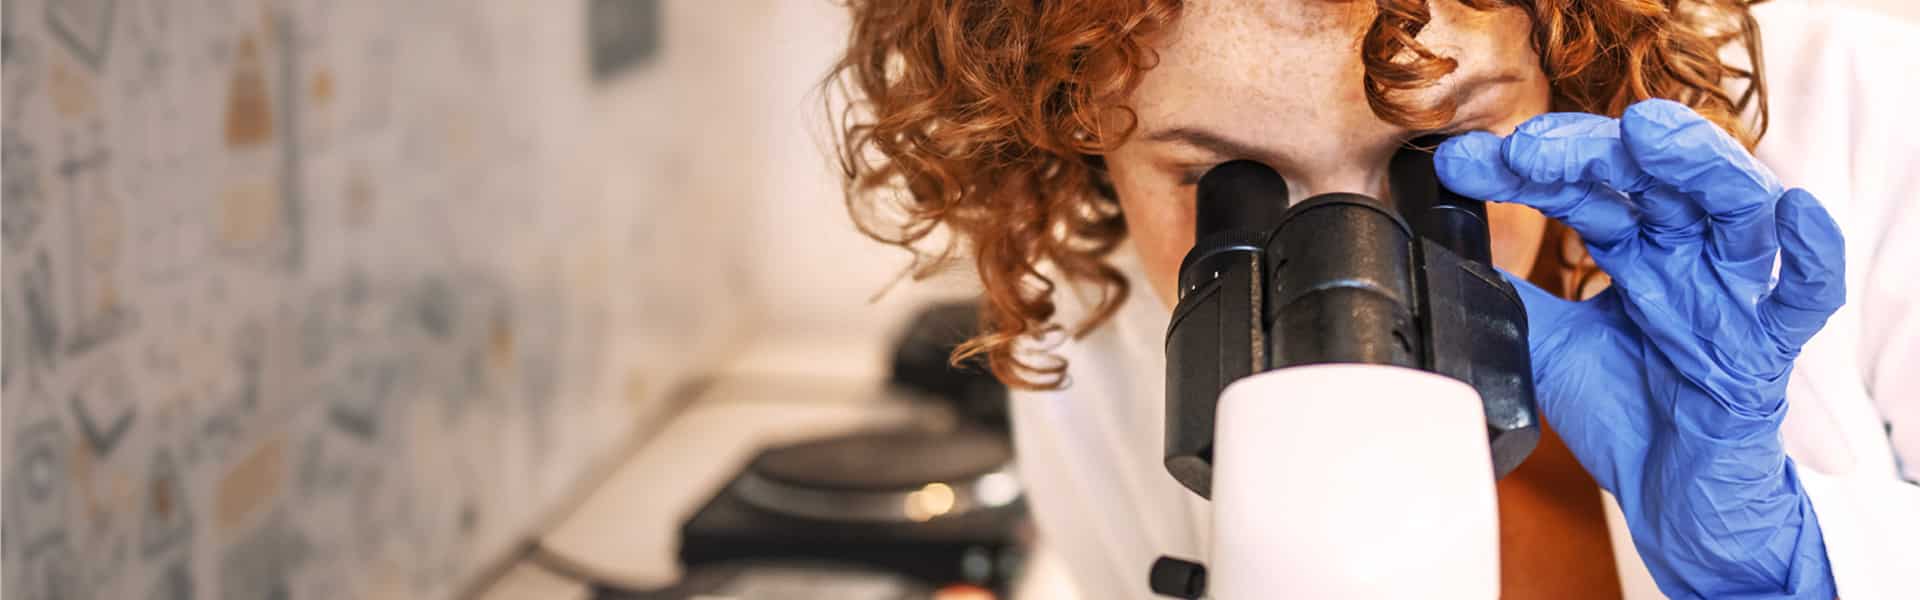 A young woman with red hair studies using a microscope